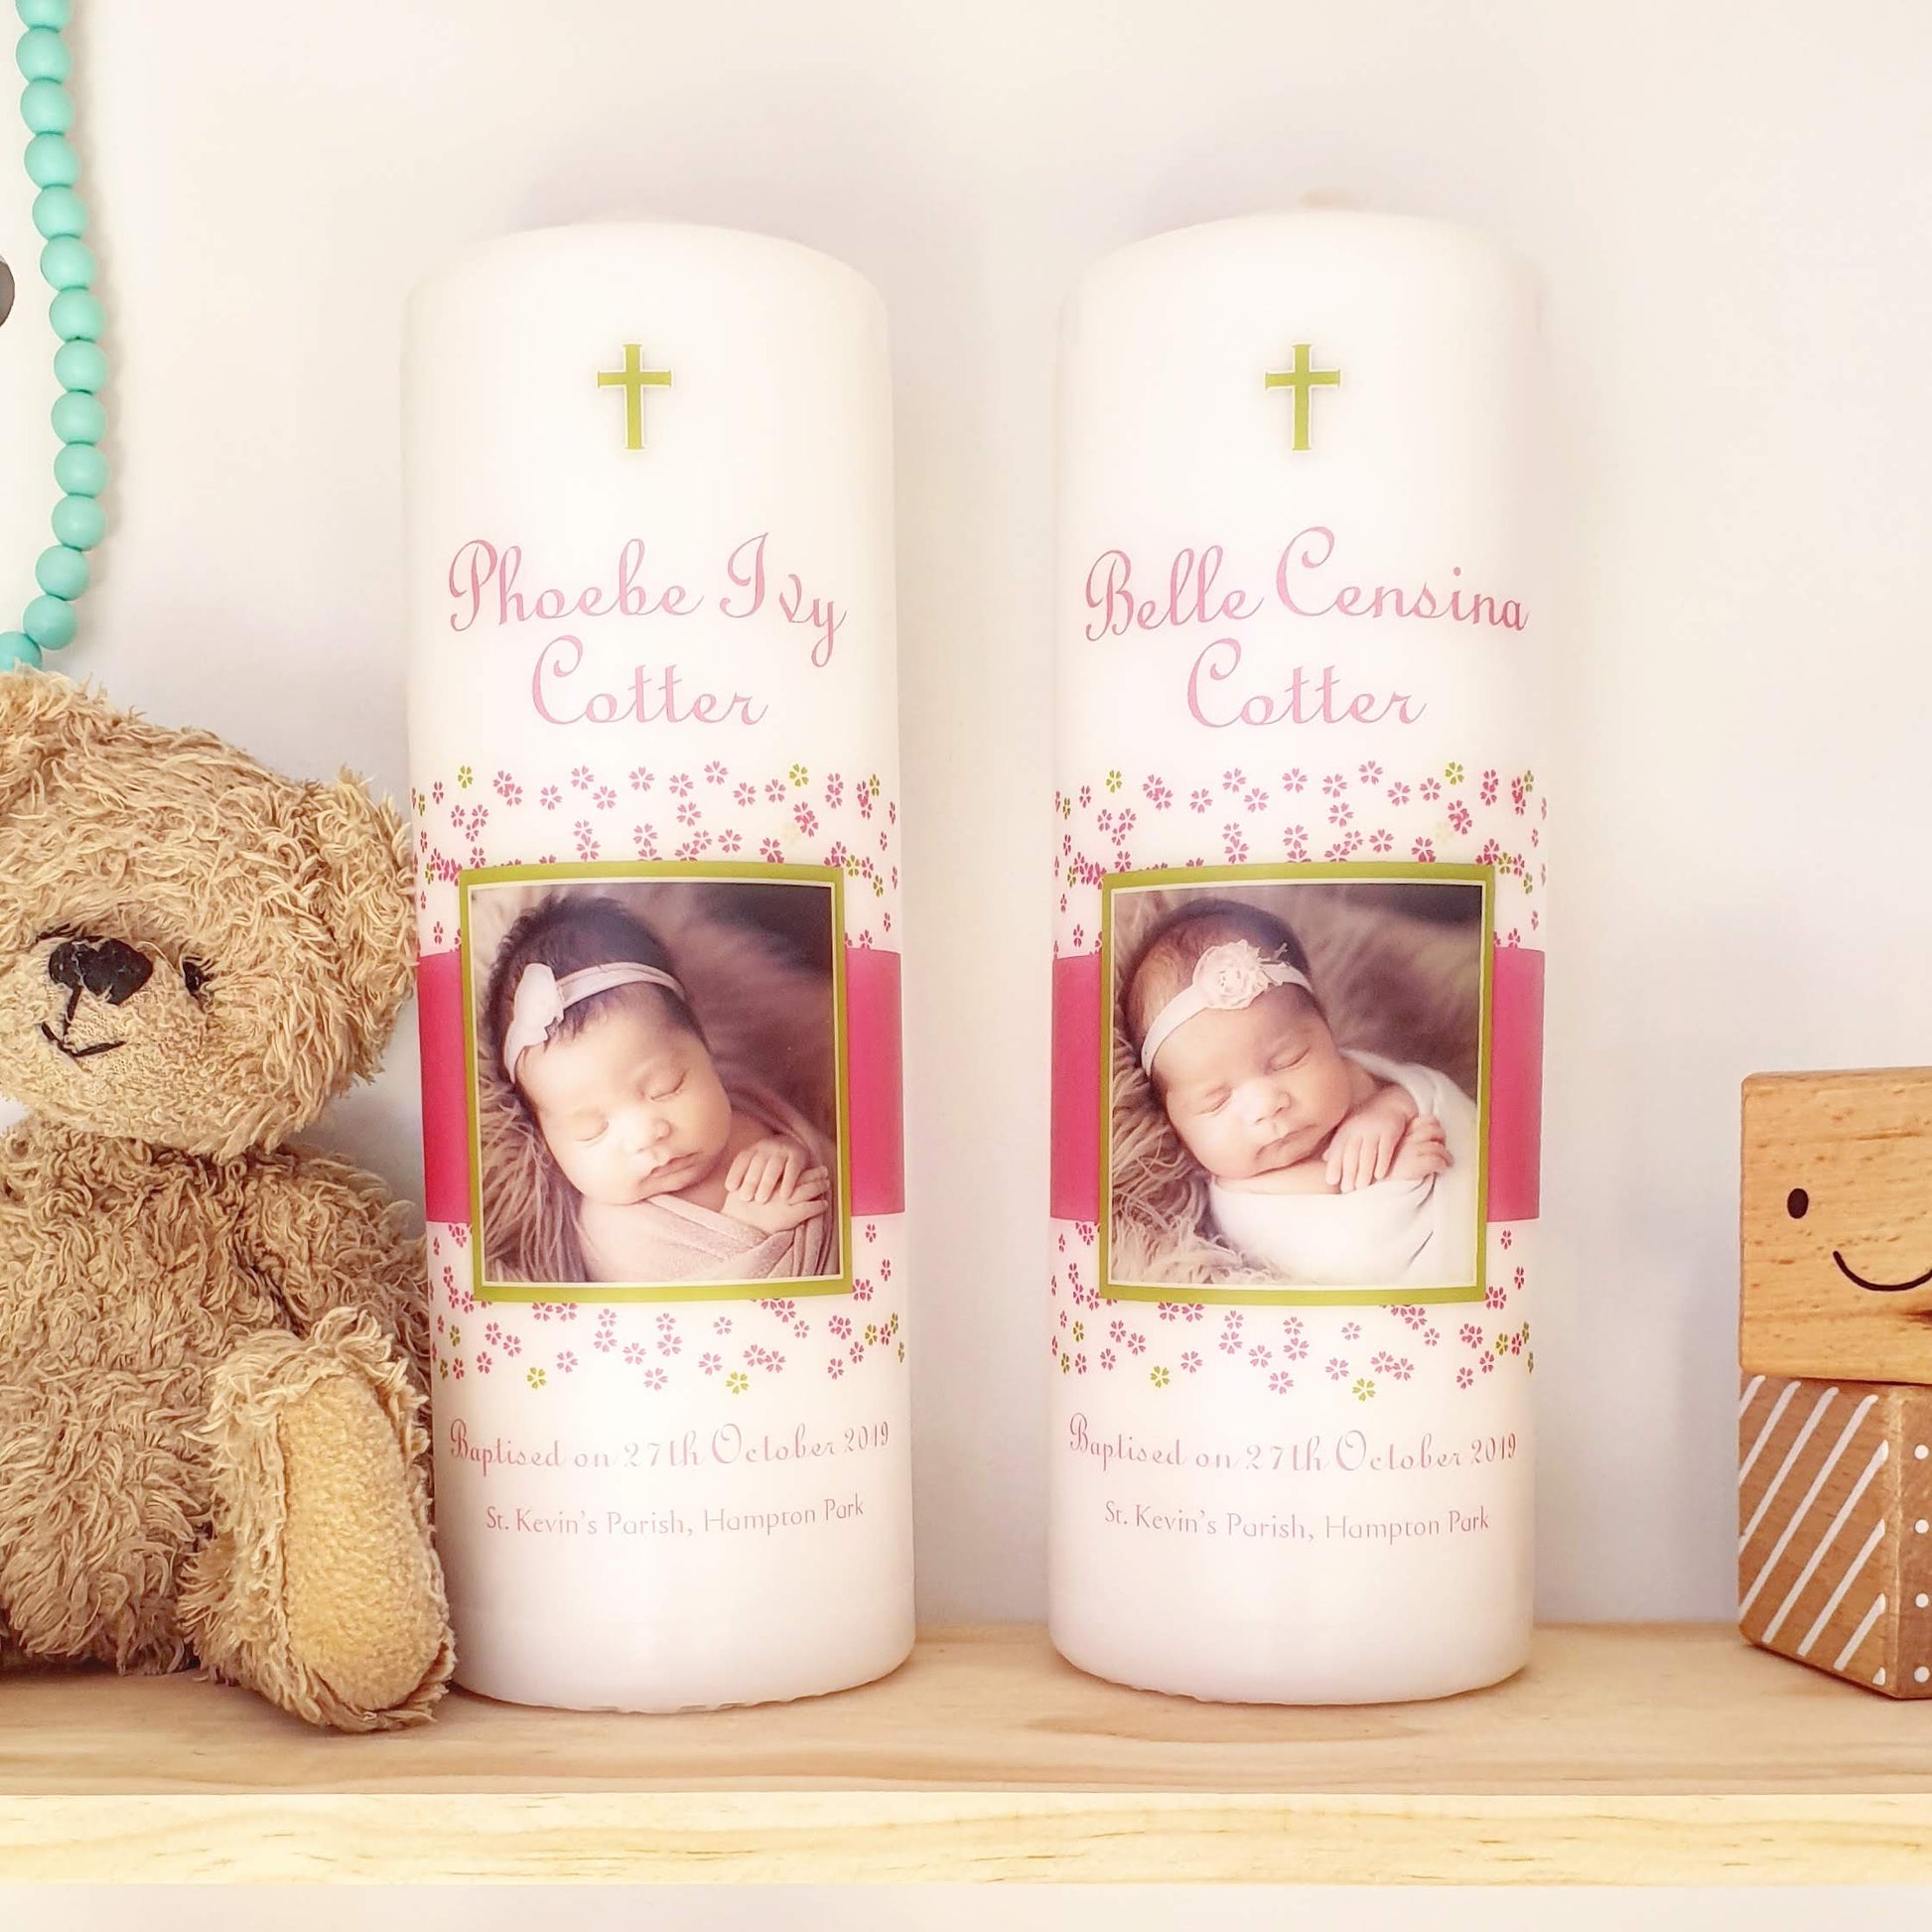 Two Baptism Candles with a photo of a baby and flowers on them with a teddy bear and 2 wooden toy blocks